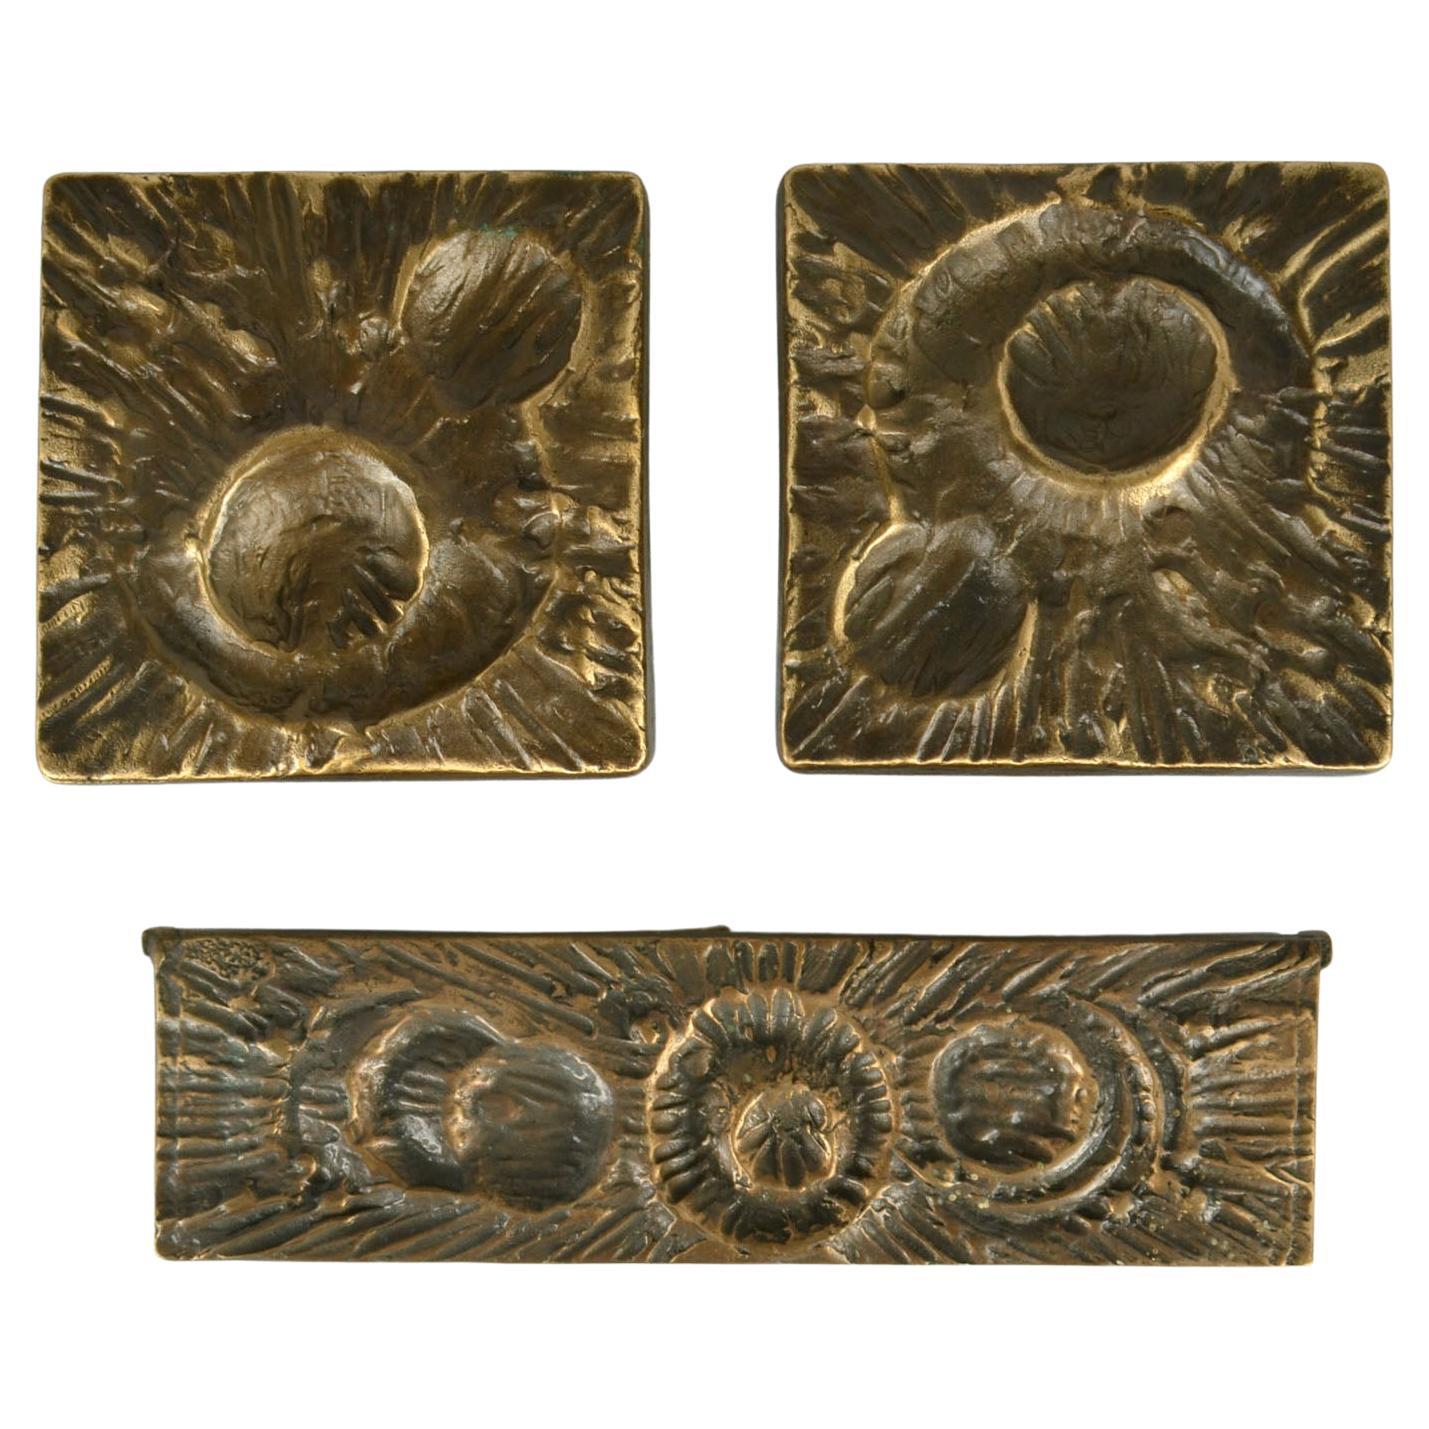 Two square cast bronze door handle and letter box with strong relief like craters in a landscape seen from above.
There is a third 
The handle brackets are attached to the main plate by two fixings. The handles are fitted to the door with two long